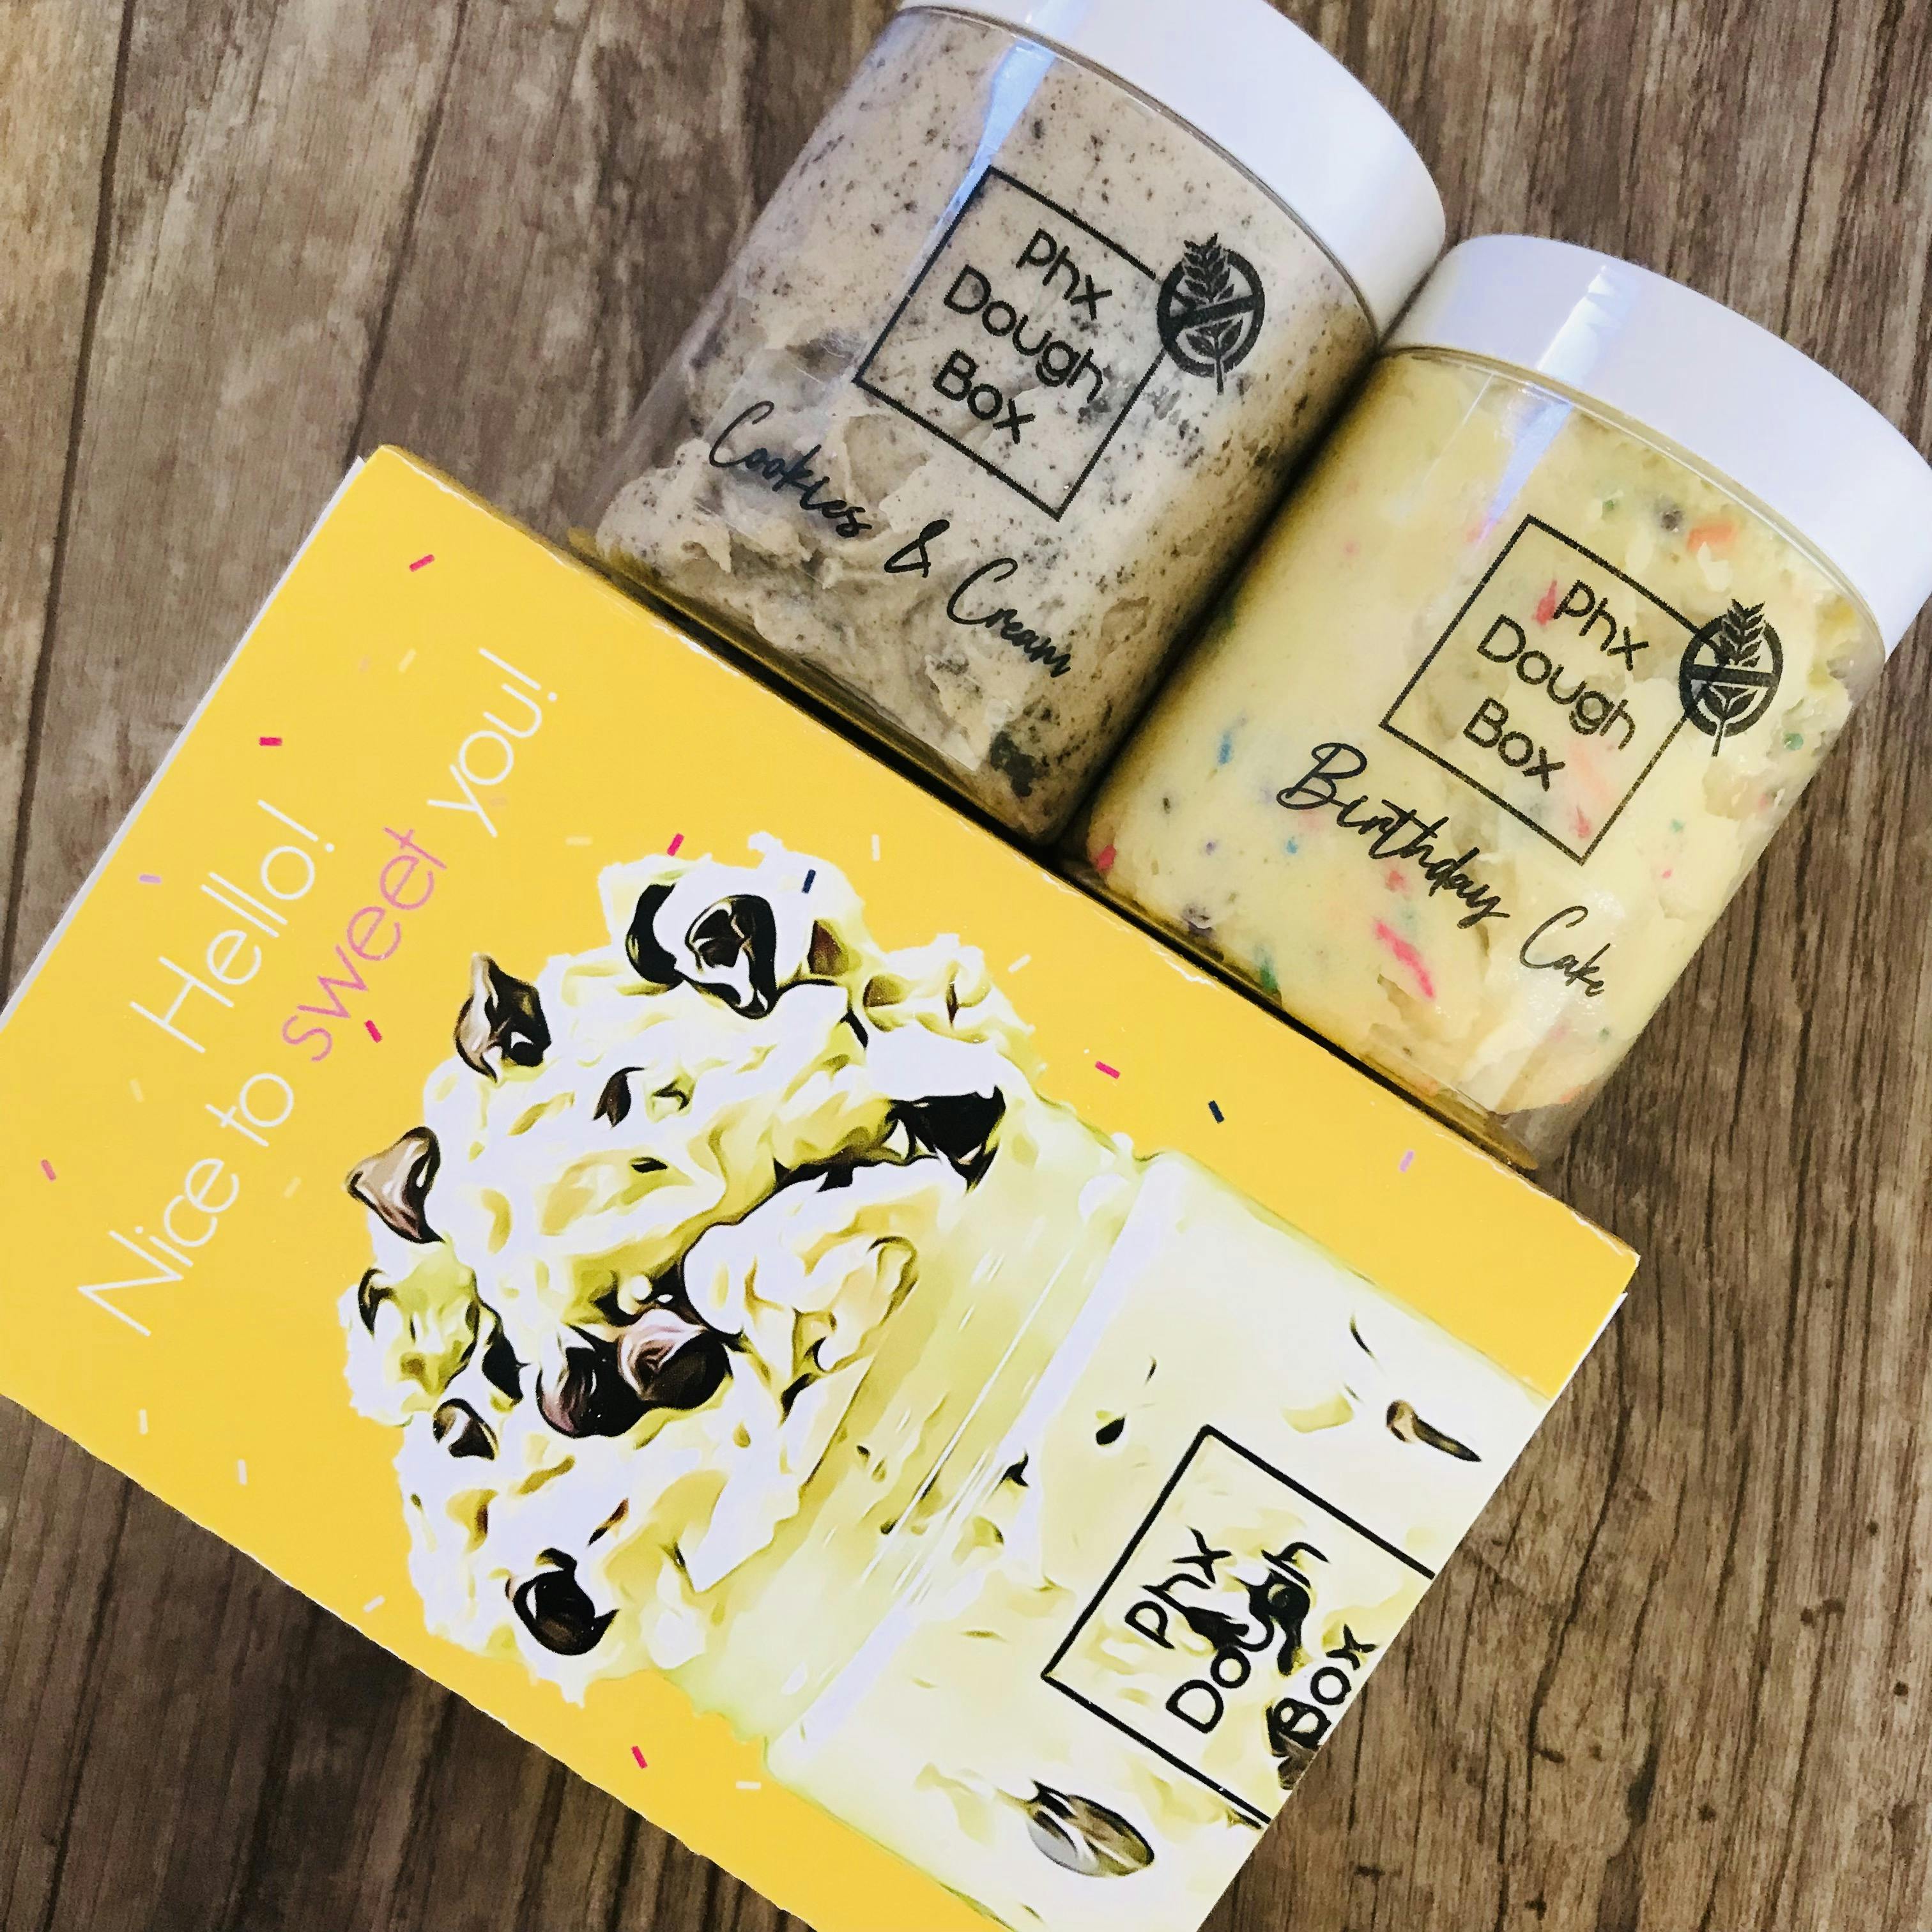 4 pack Edible Cookie Dough! Delivery+shipping 